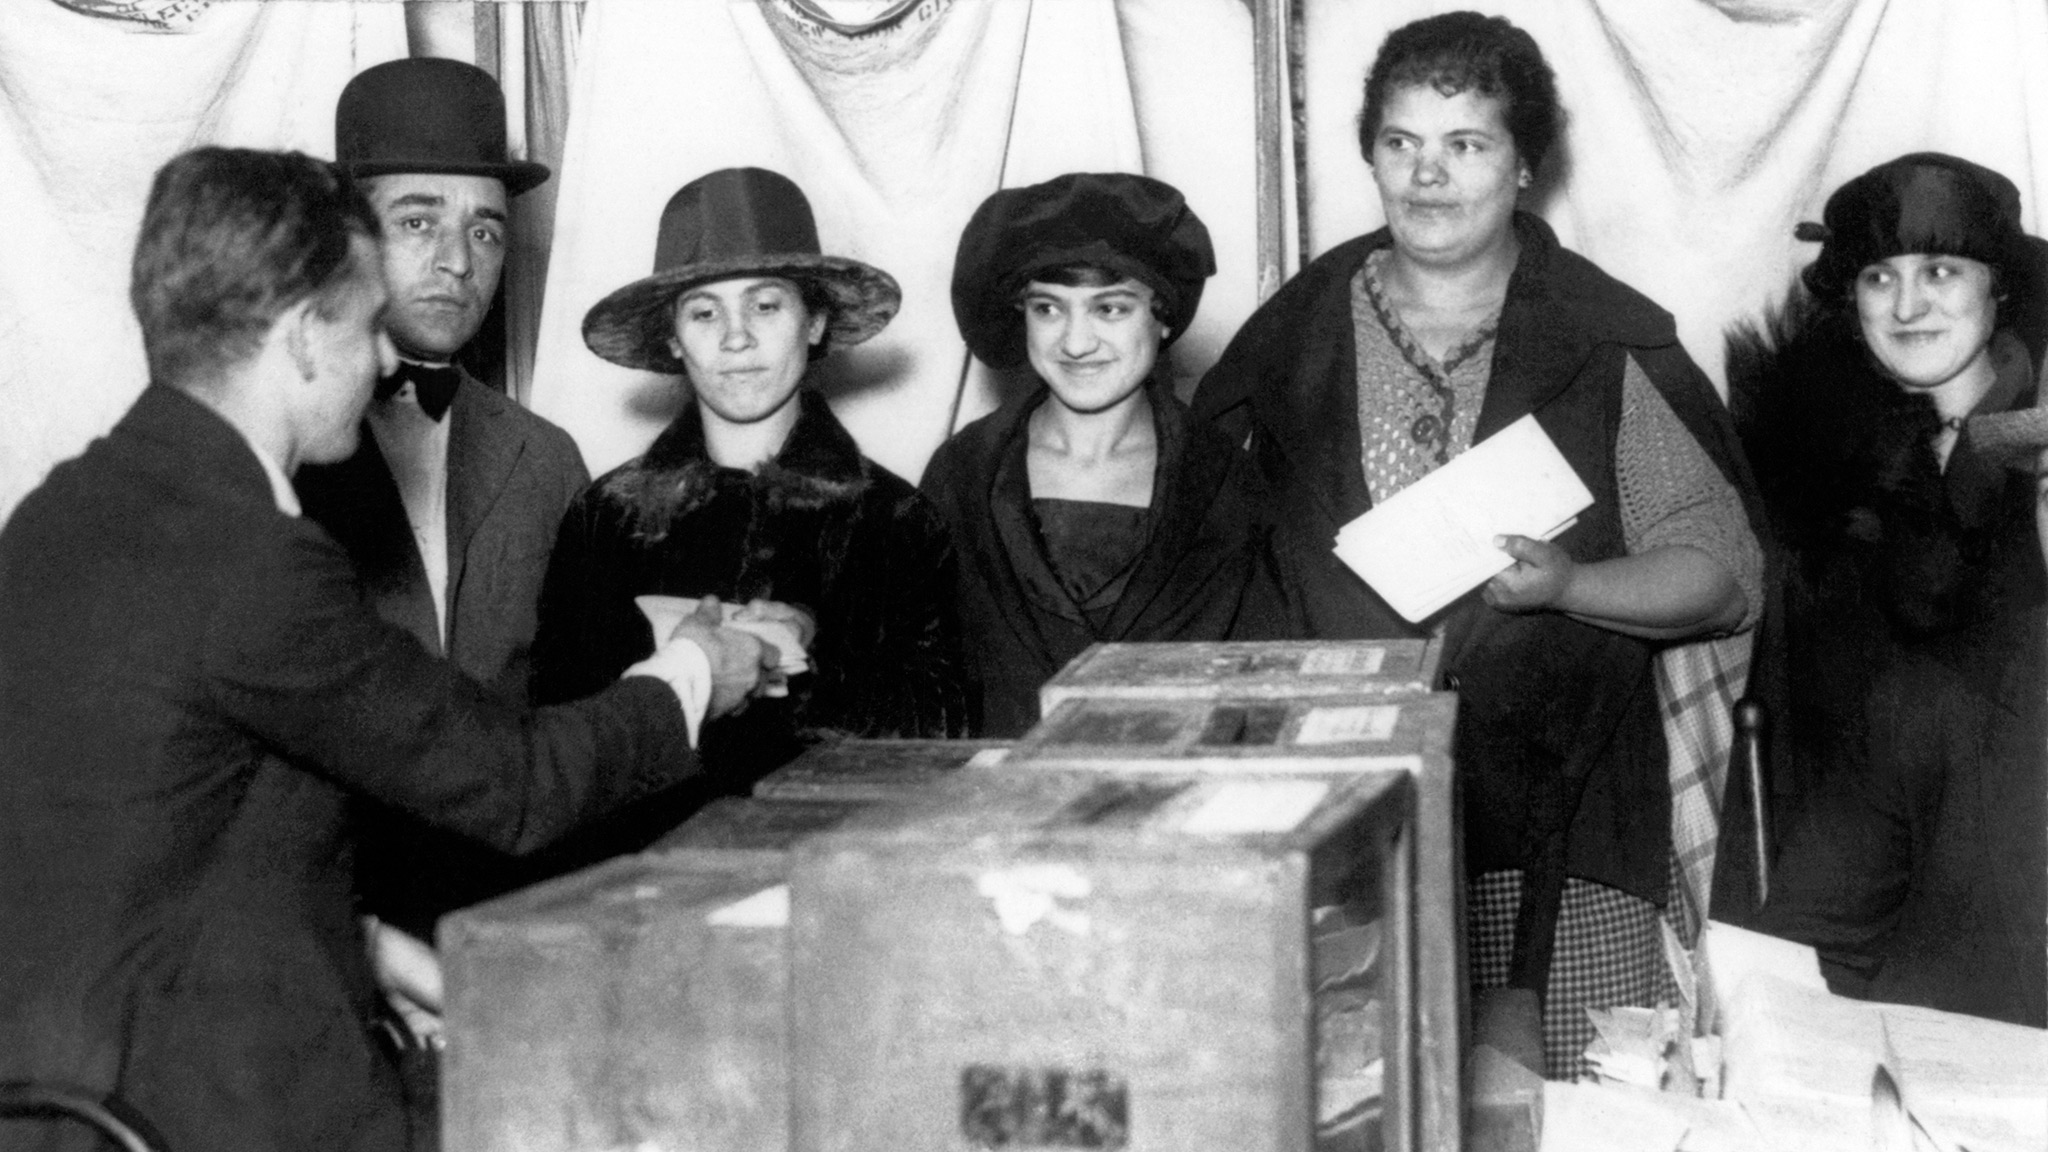 August 18, 1920: Women Got The Right to Vote